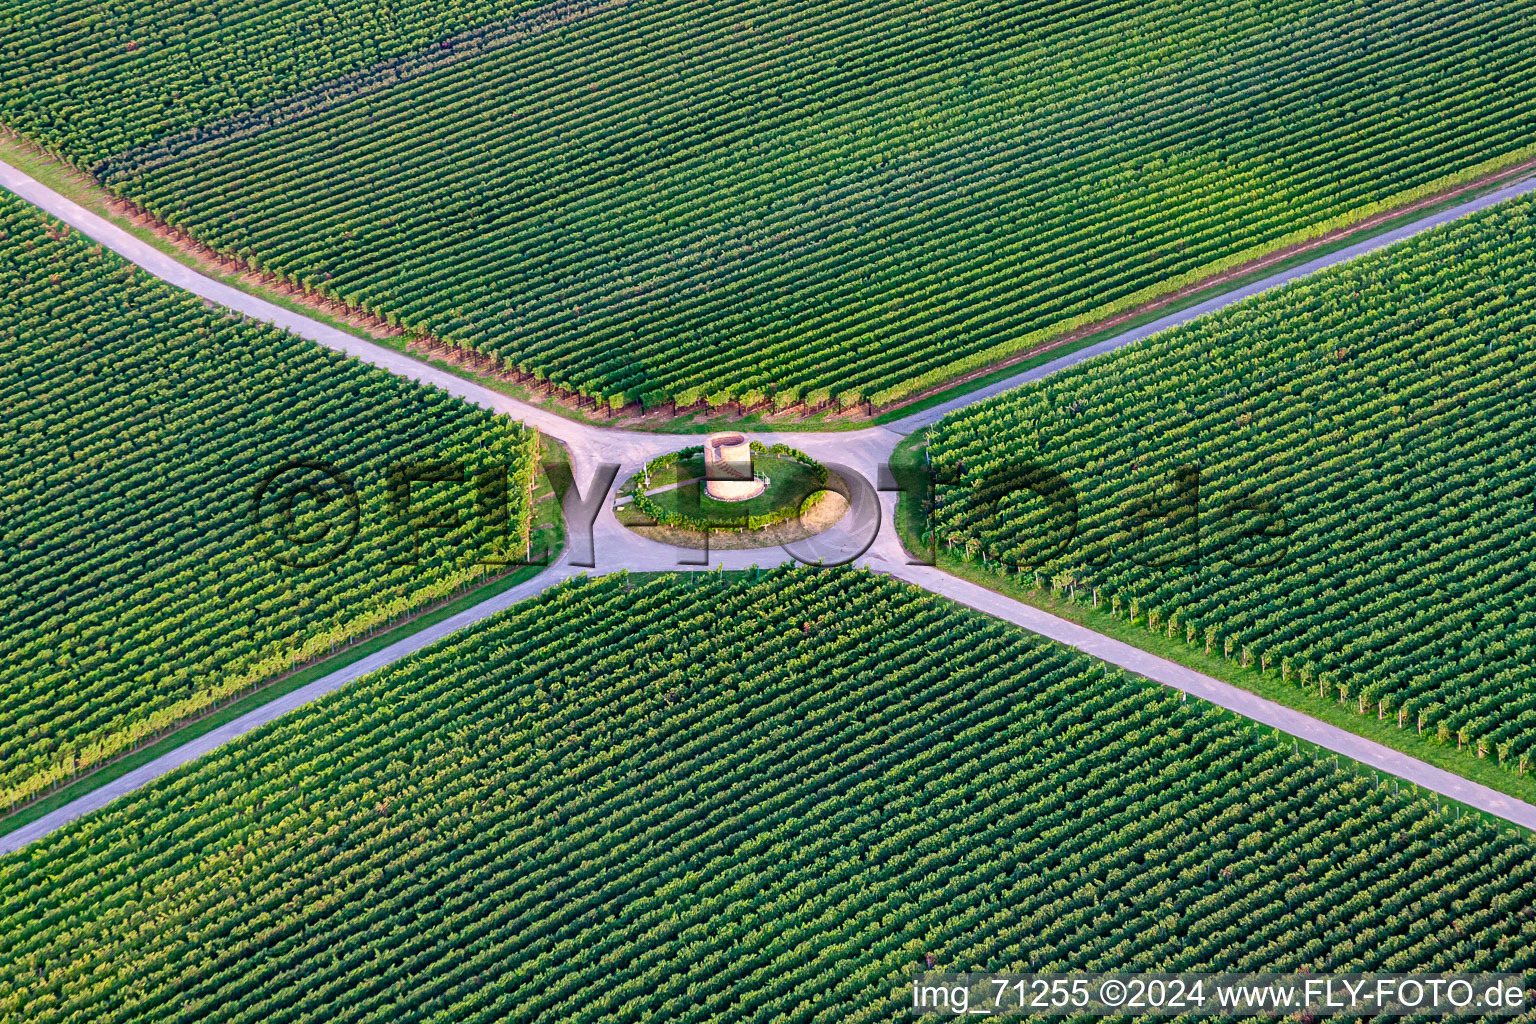 Aerial view of Fields of wine cultivation landscape in Hochstadt (Pfalz) in the state Rhineland-Palatinate